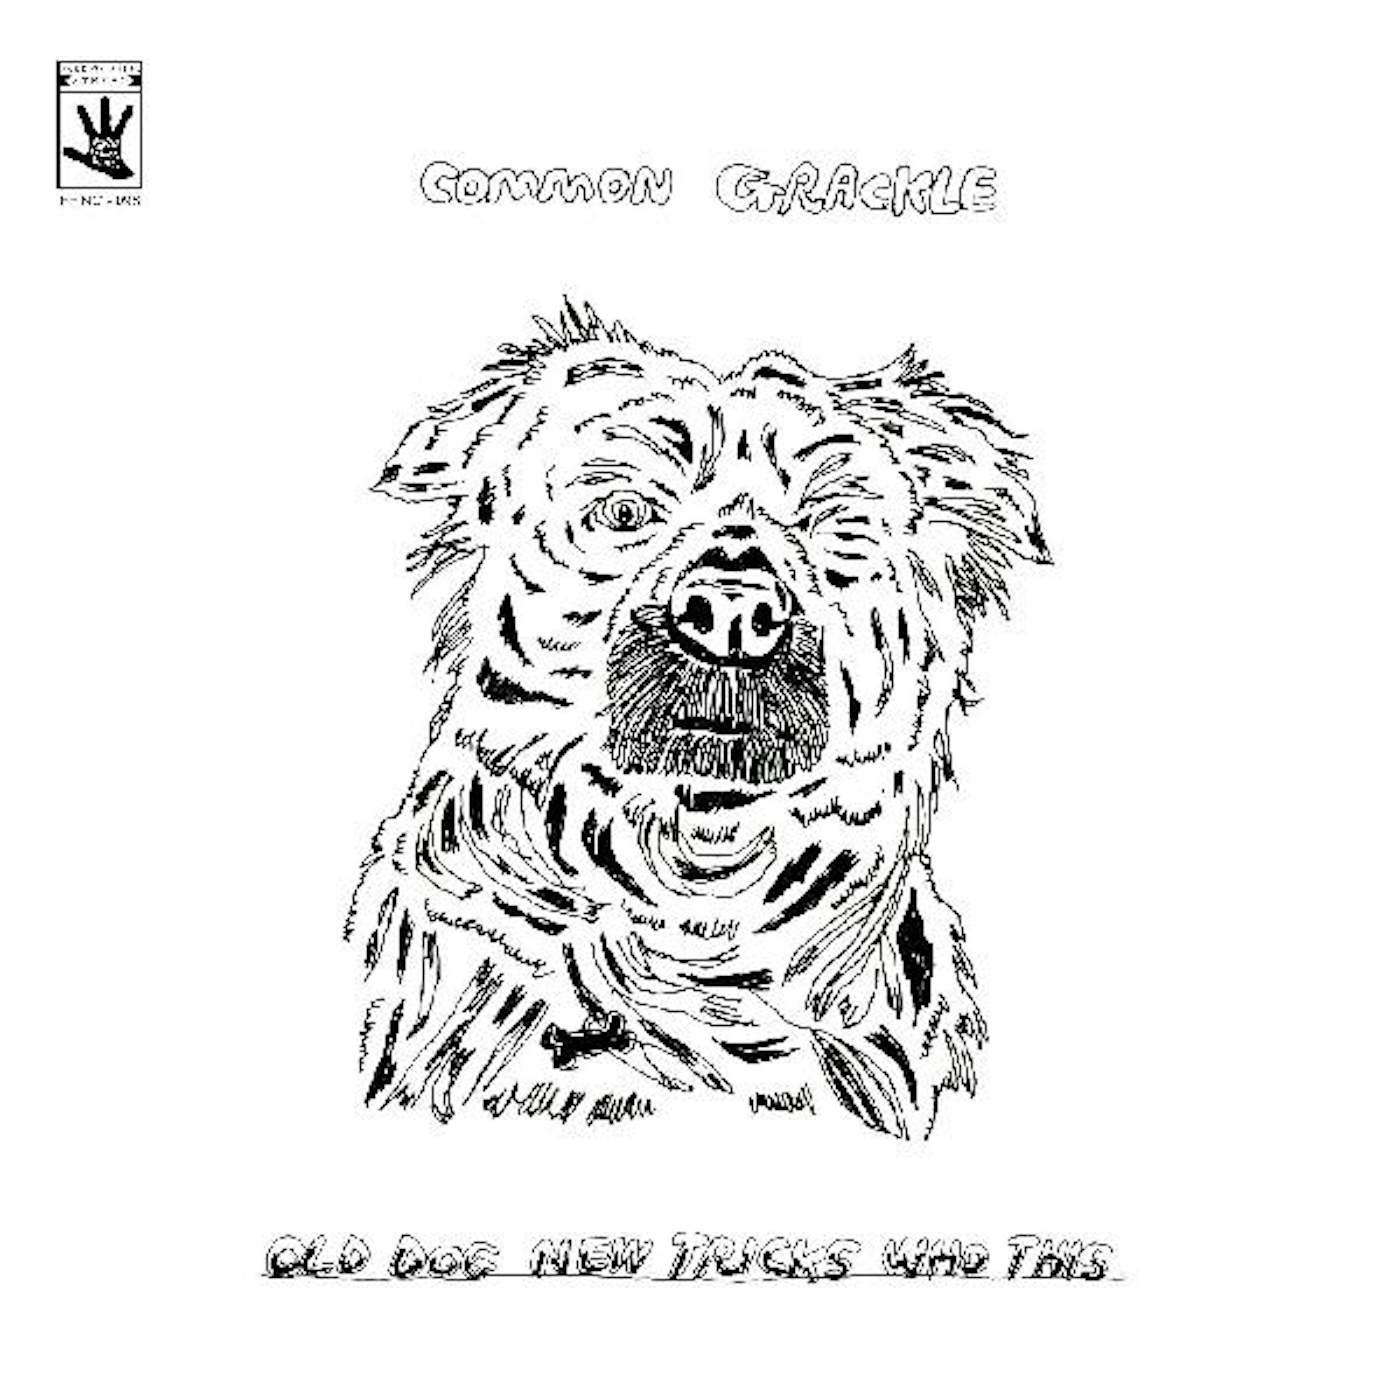 Common Grackle Old Dog New Tricks Who This Vinyl Record